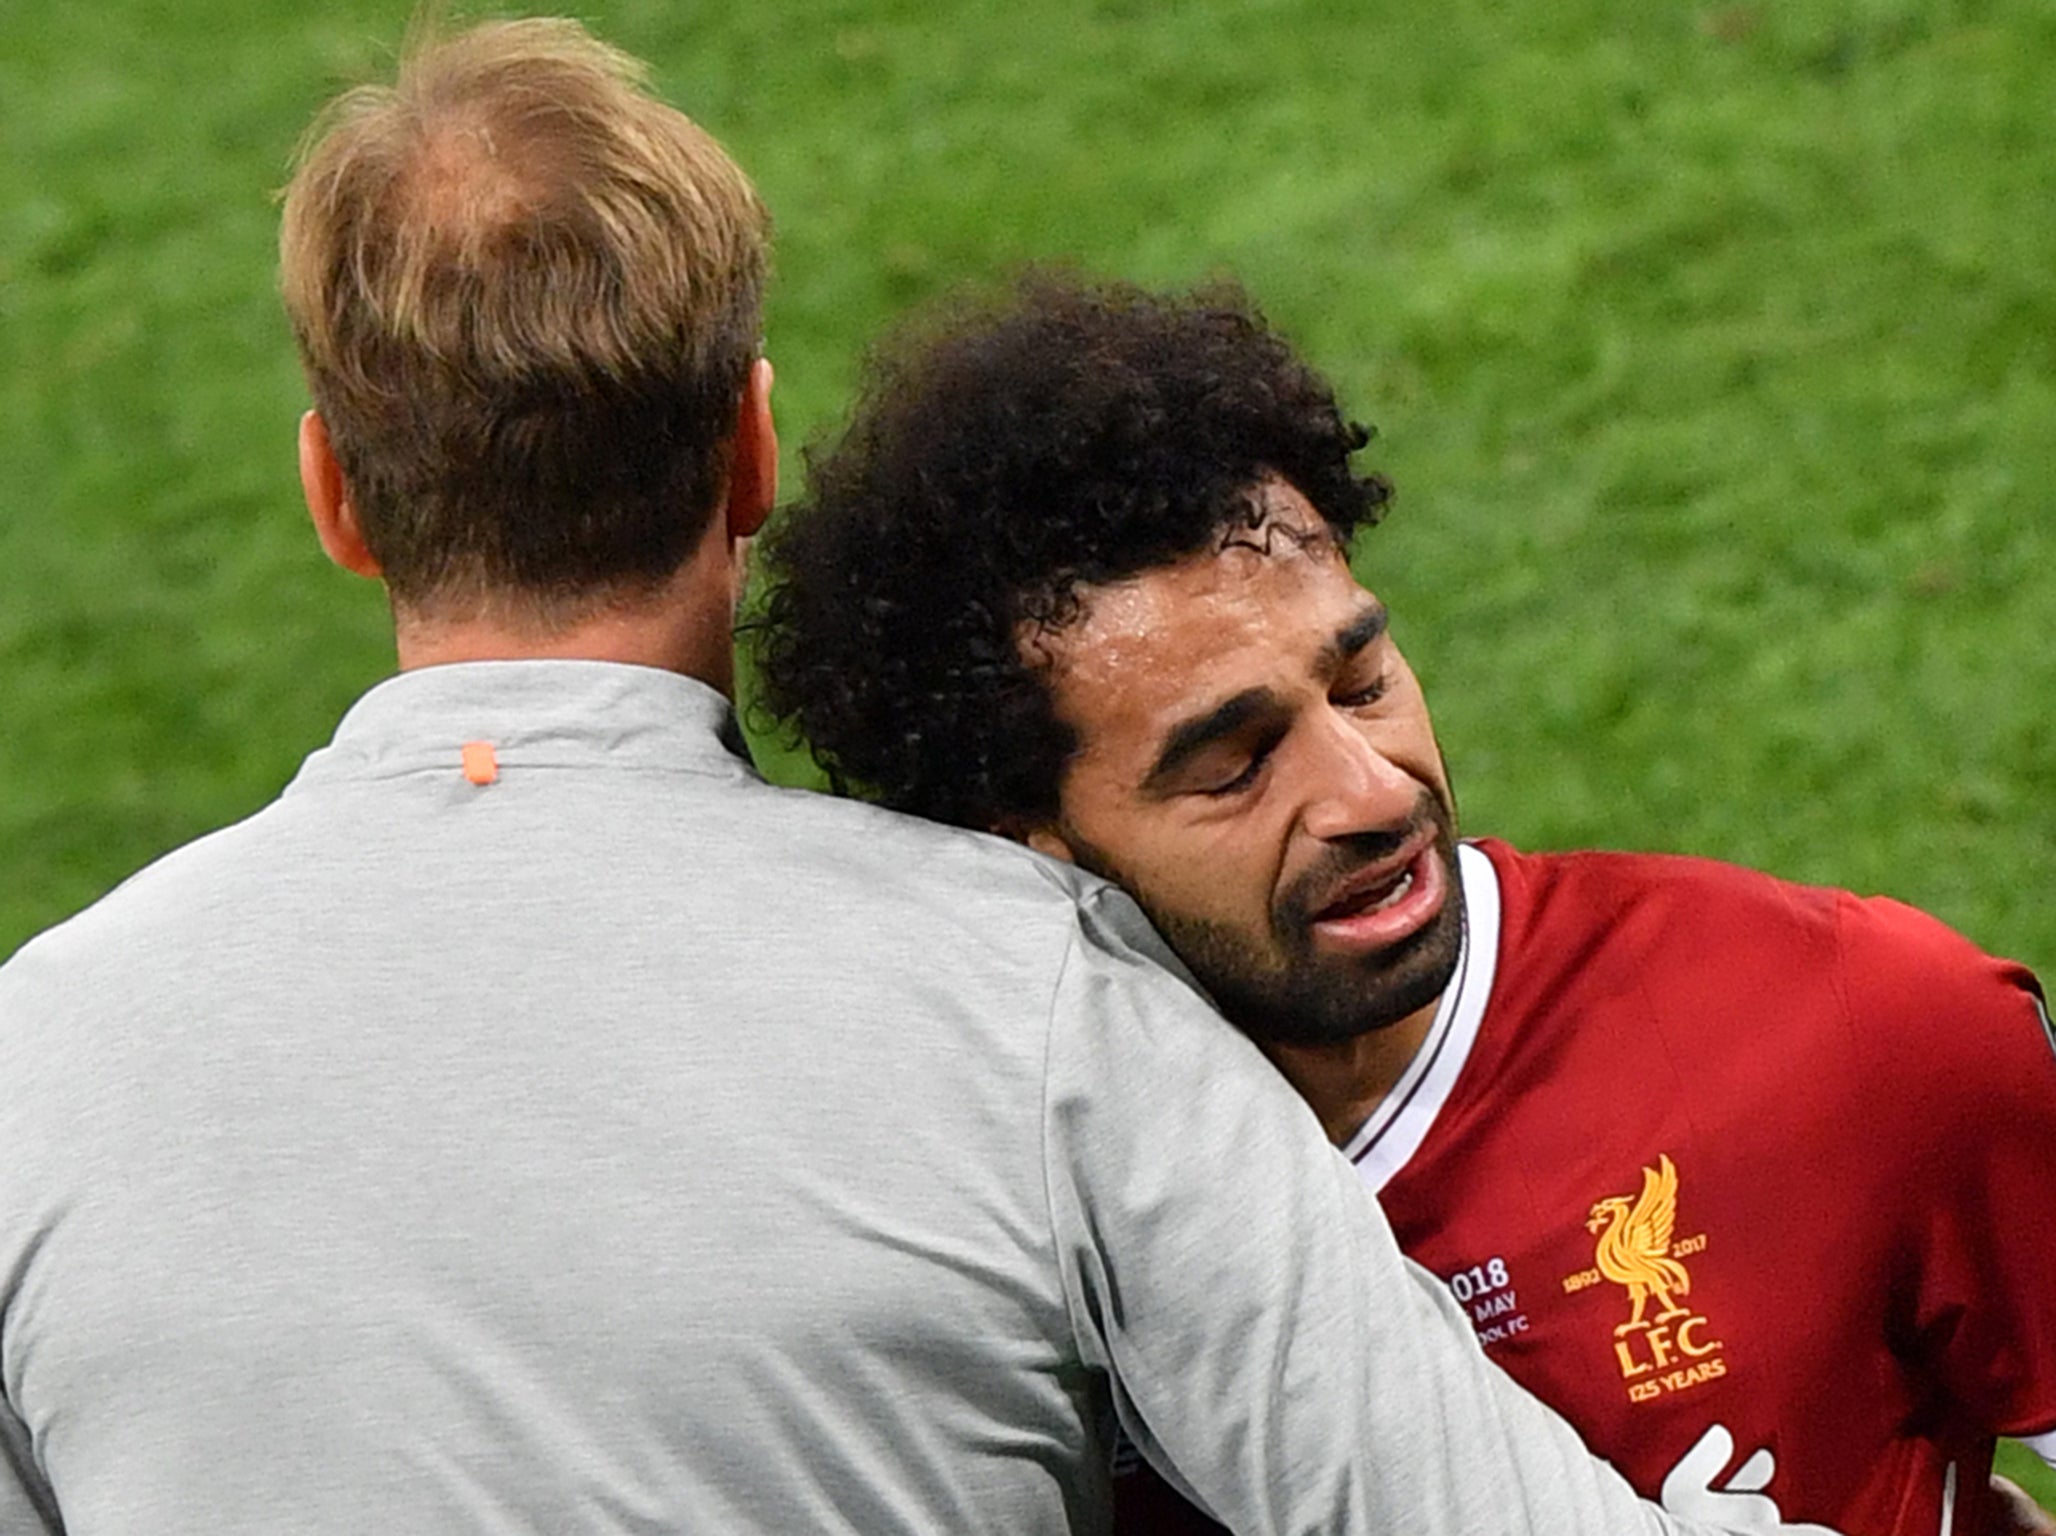 Mohamed Salah injury update: How long to recover from a dislocated shoulder and will he miss World Cup 2018?